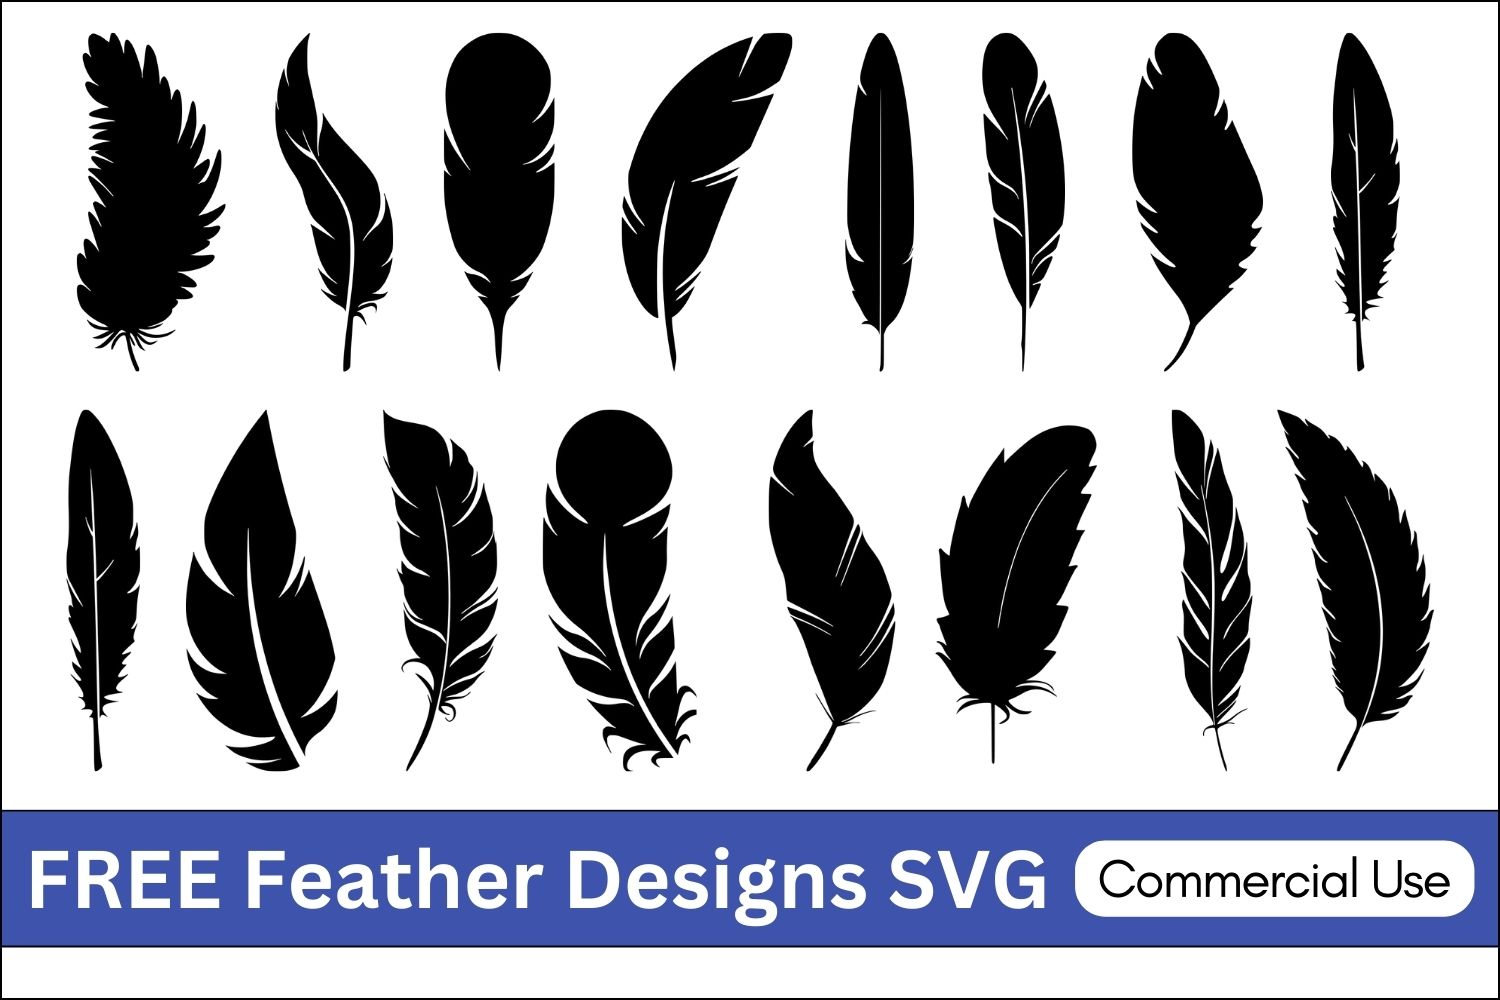 Feather Svg, Clipart, Cut Files, Silhouette, Cricut, Vector, stencil, vinyl cut files, iron on files Birds Feather, Feather, Download